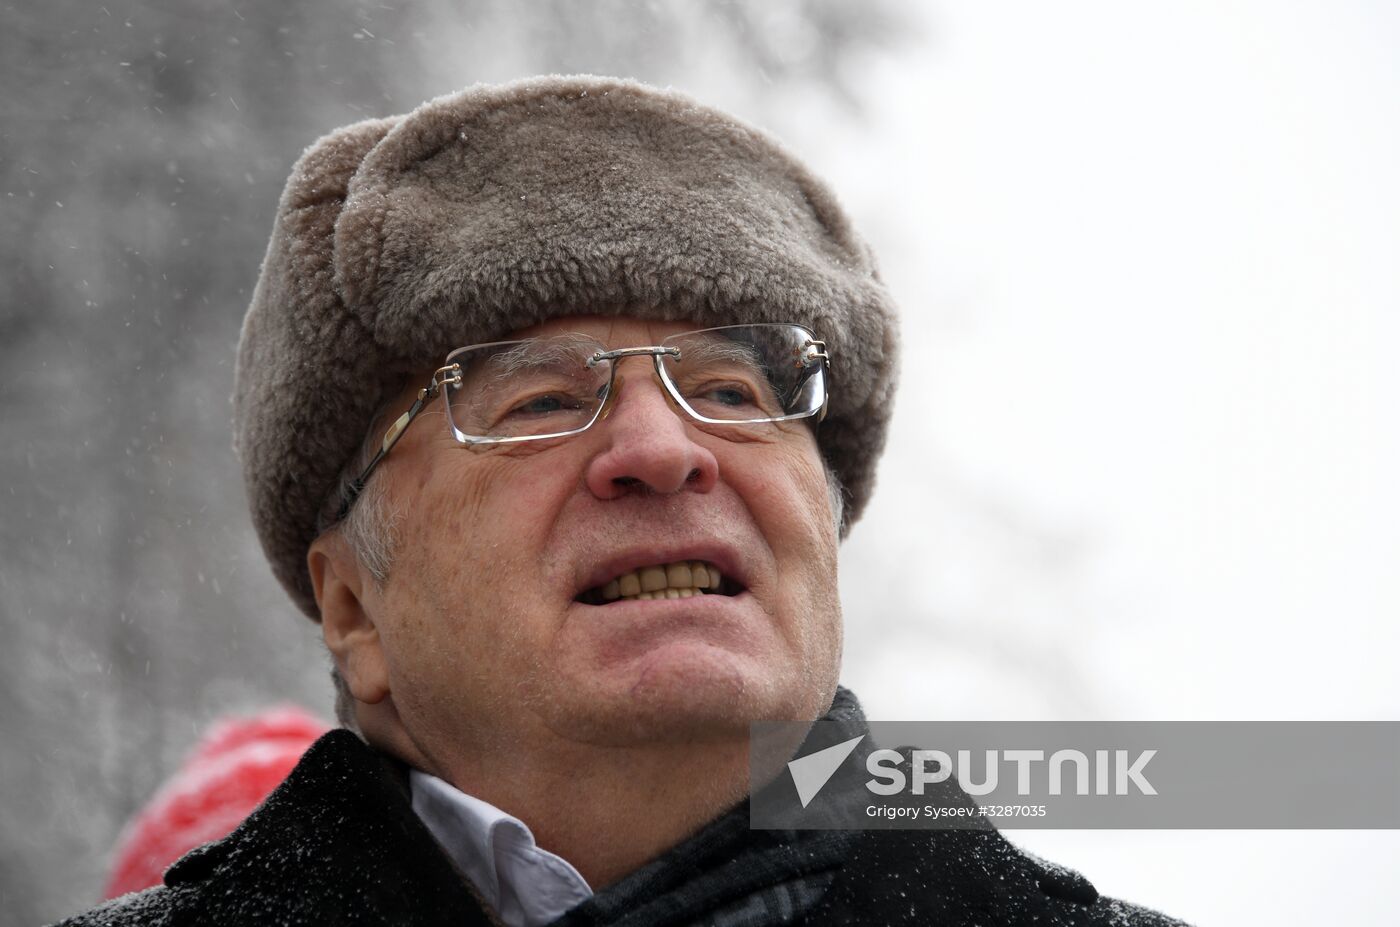 Presidential candidate Vladimir Zhirinovsky takes part in Moscow Ski Run 2018 competition